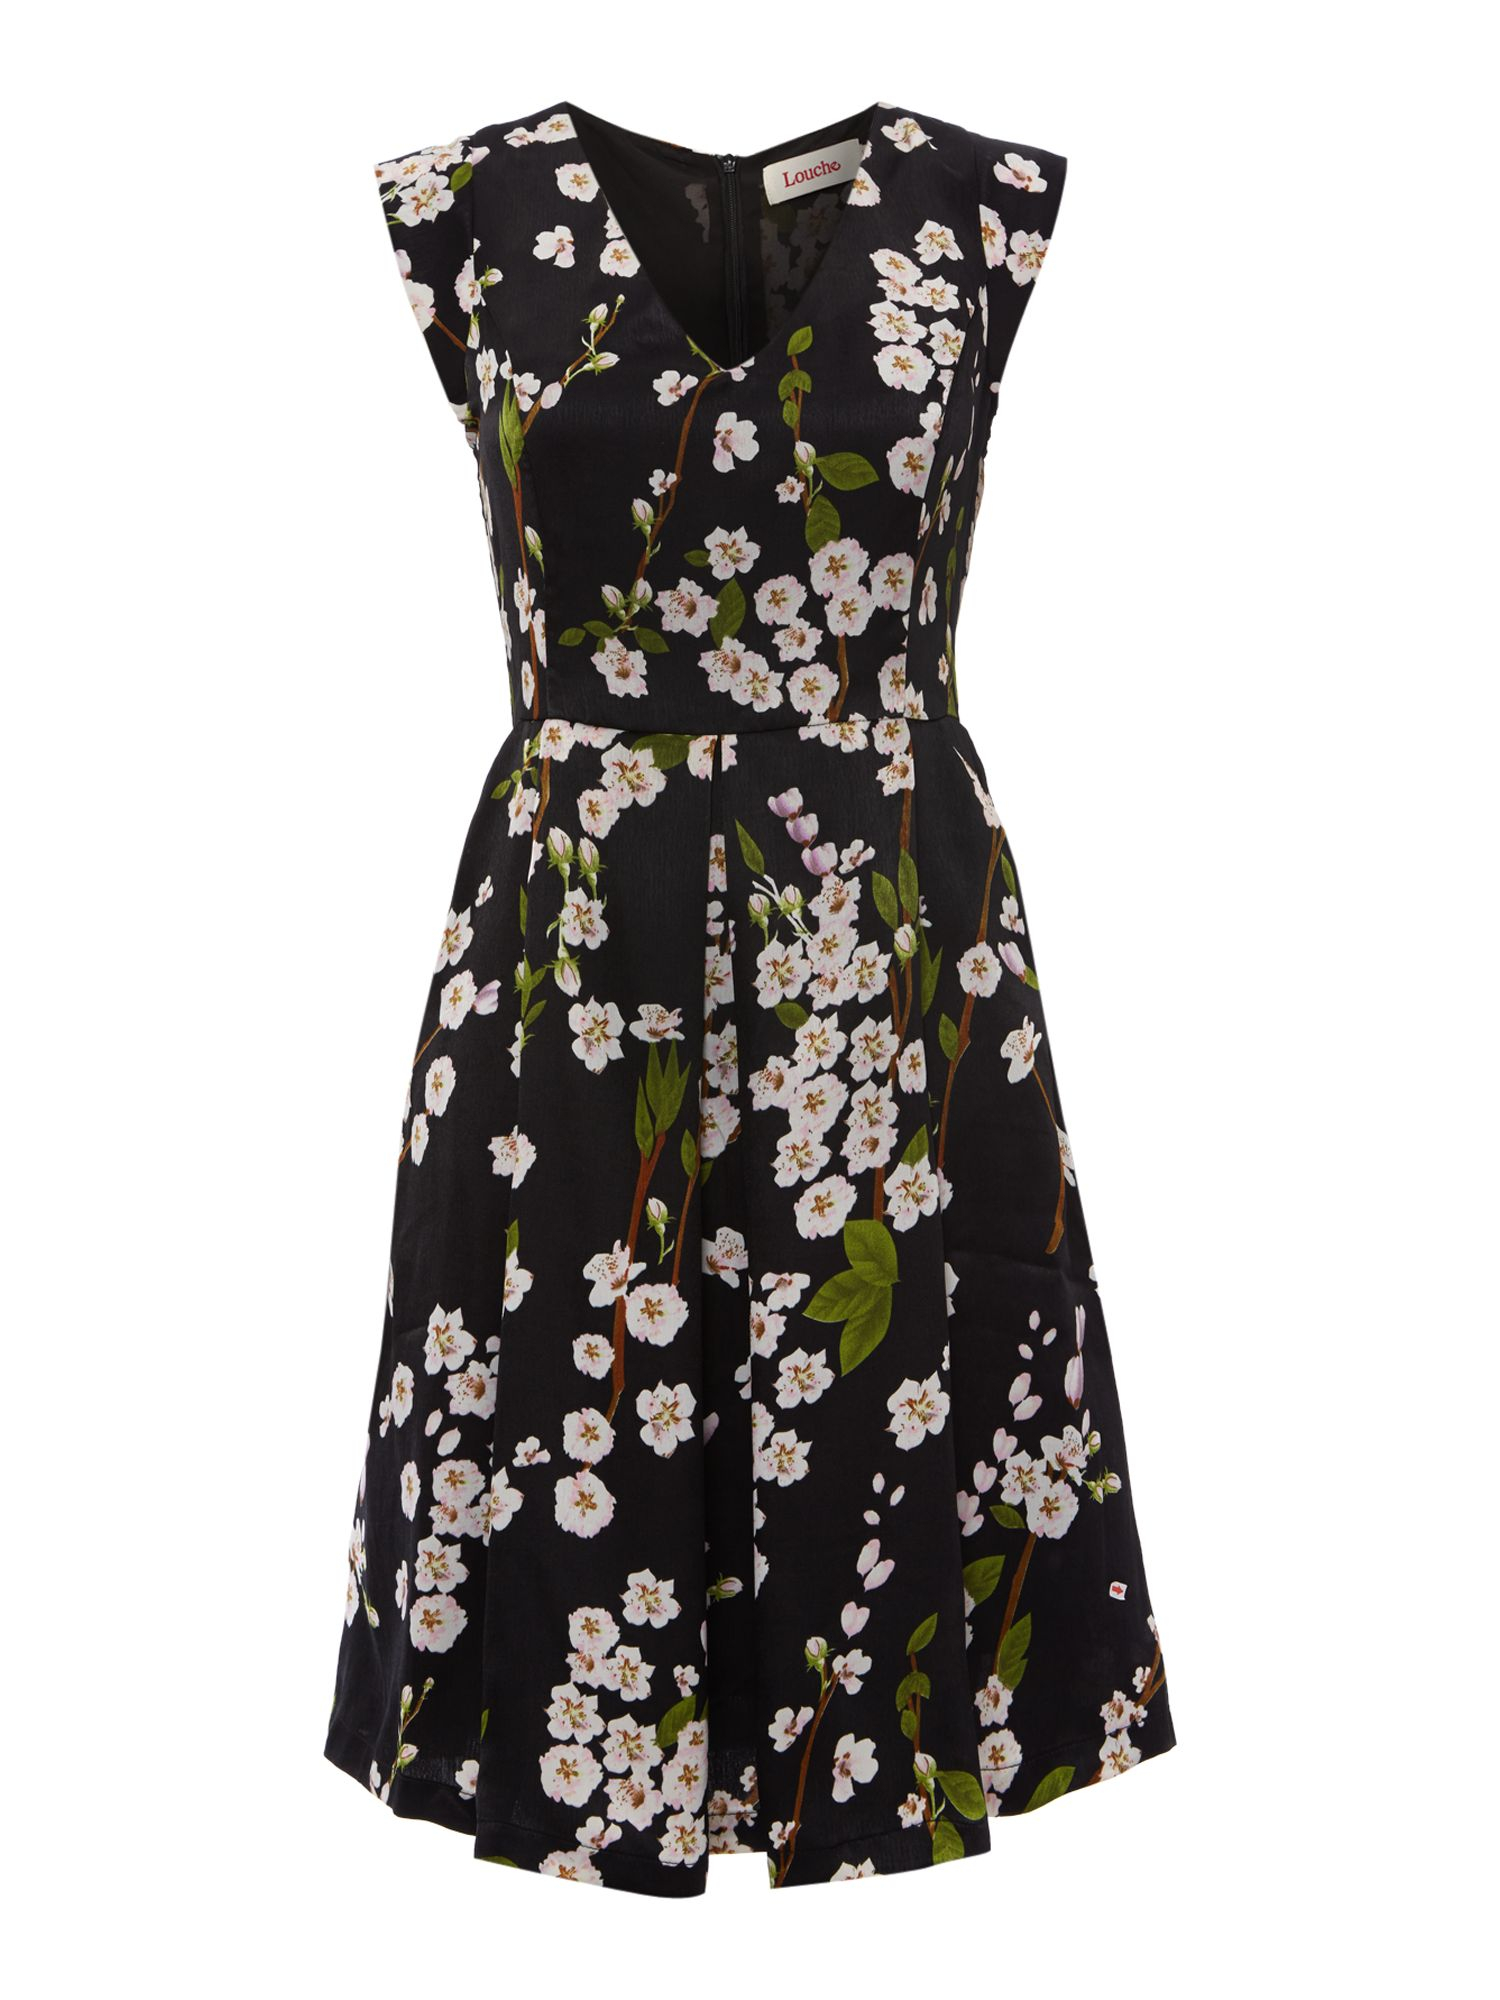 Louche Cap Sleeve Floral Print A Line Dress in Black | Lyst